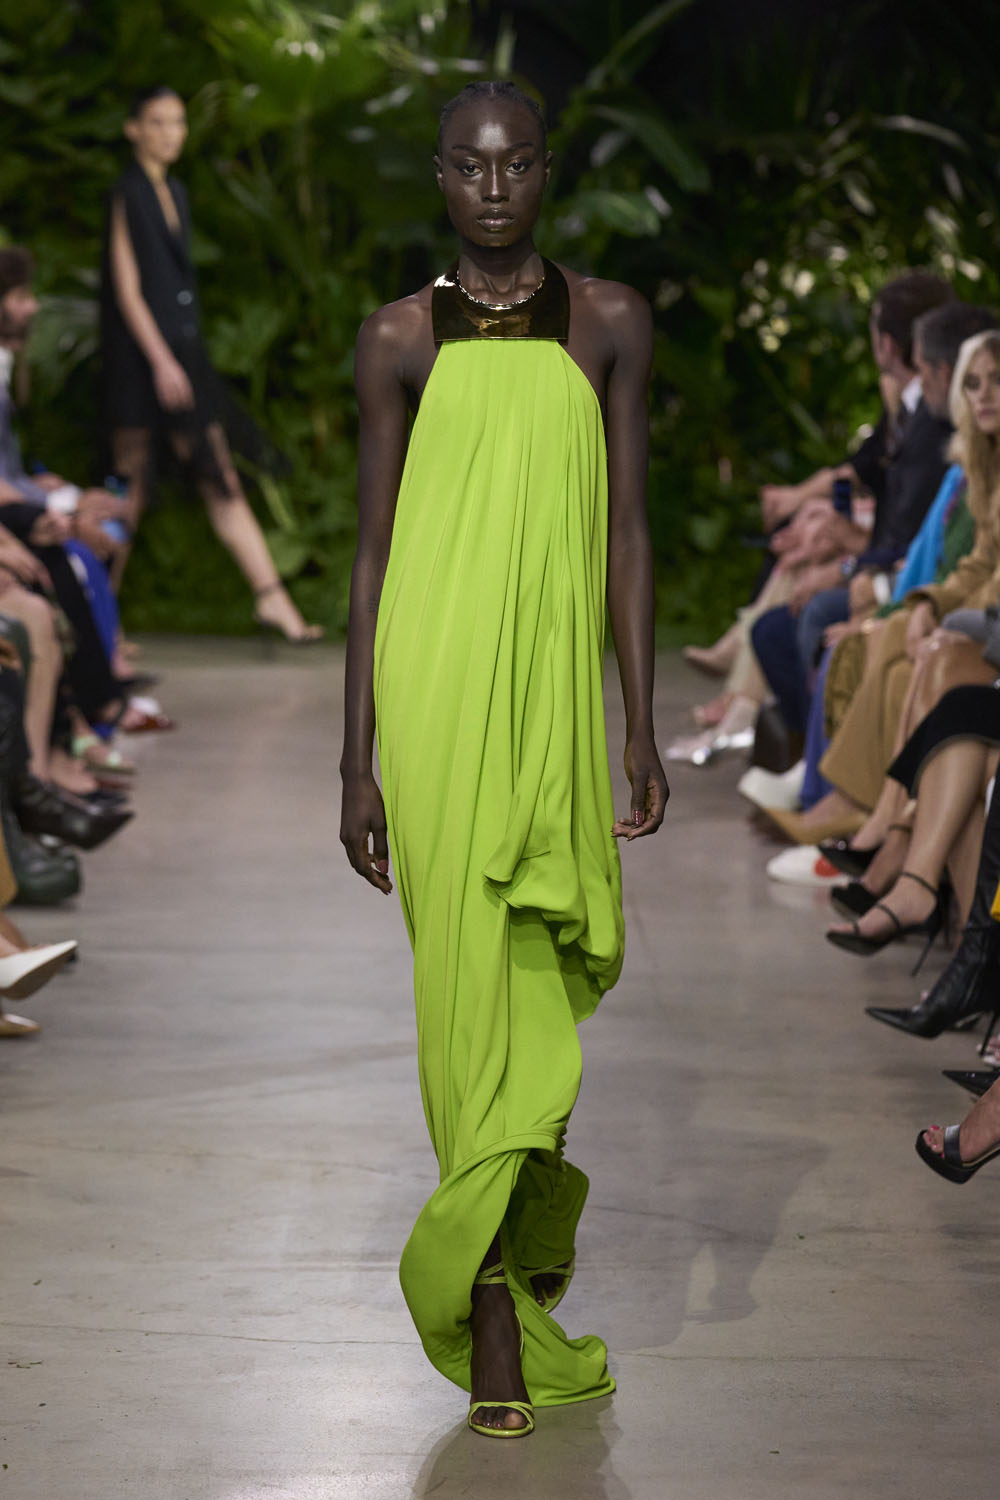 Catwalk Catch-up: Michael Kors is Always Worth a Look - Go Fug Yourself